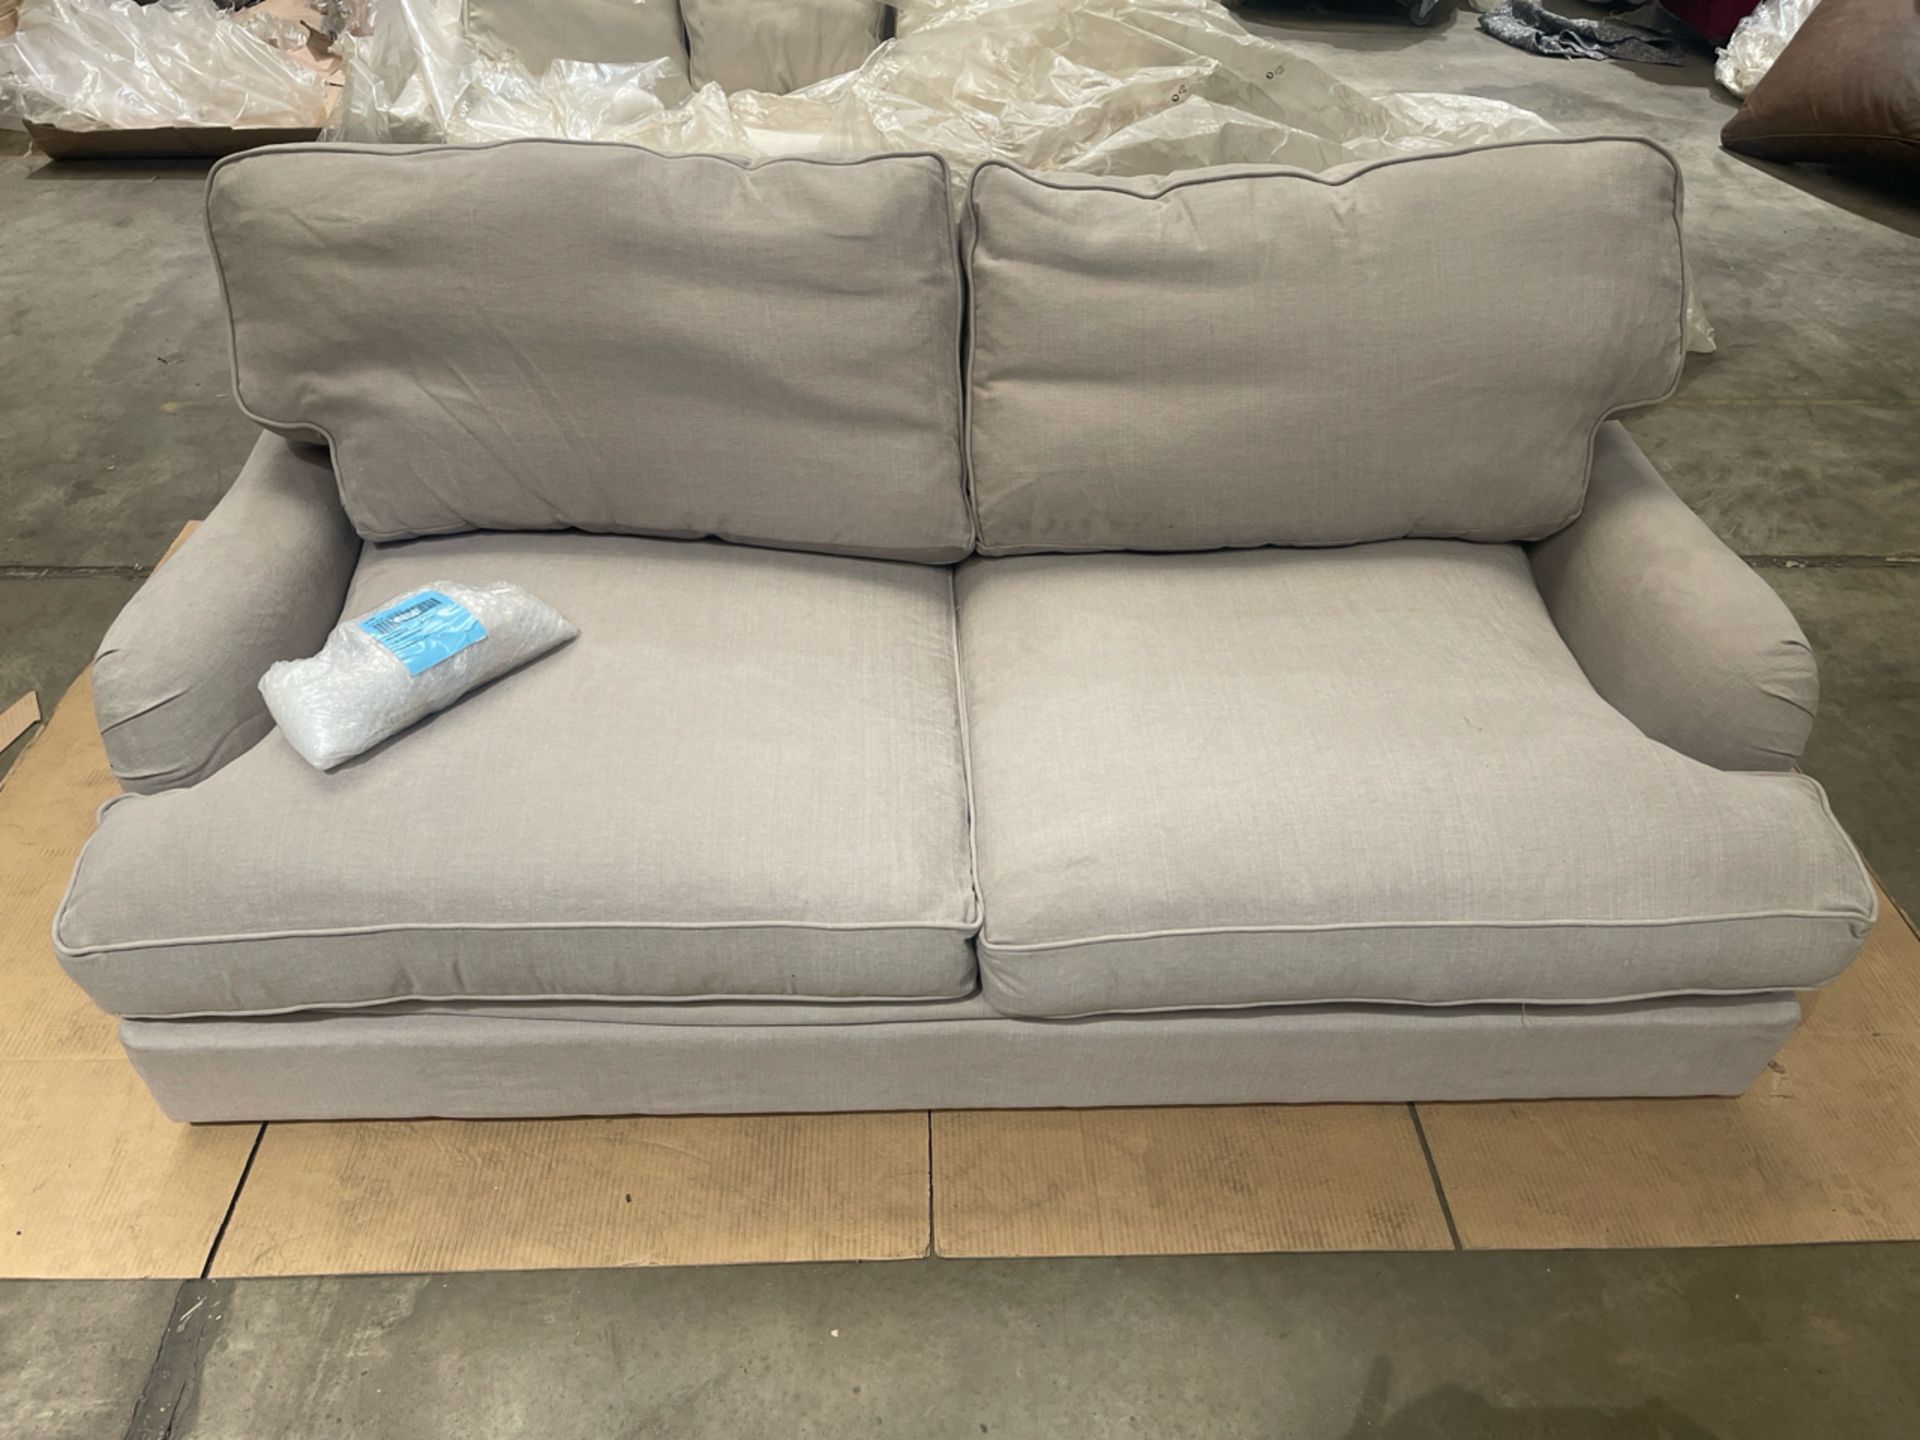 Bluebell 3 Seat Sofa Bed In Stone Brushed Linen Cotton RRP - £2620 - Image 2 of 8